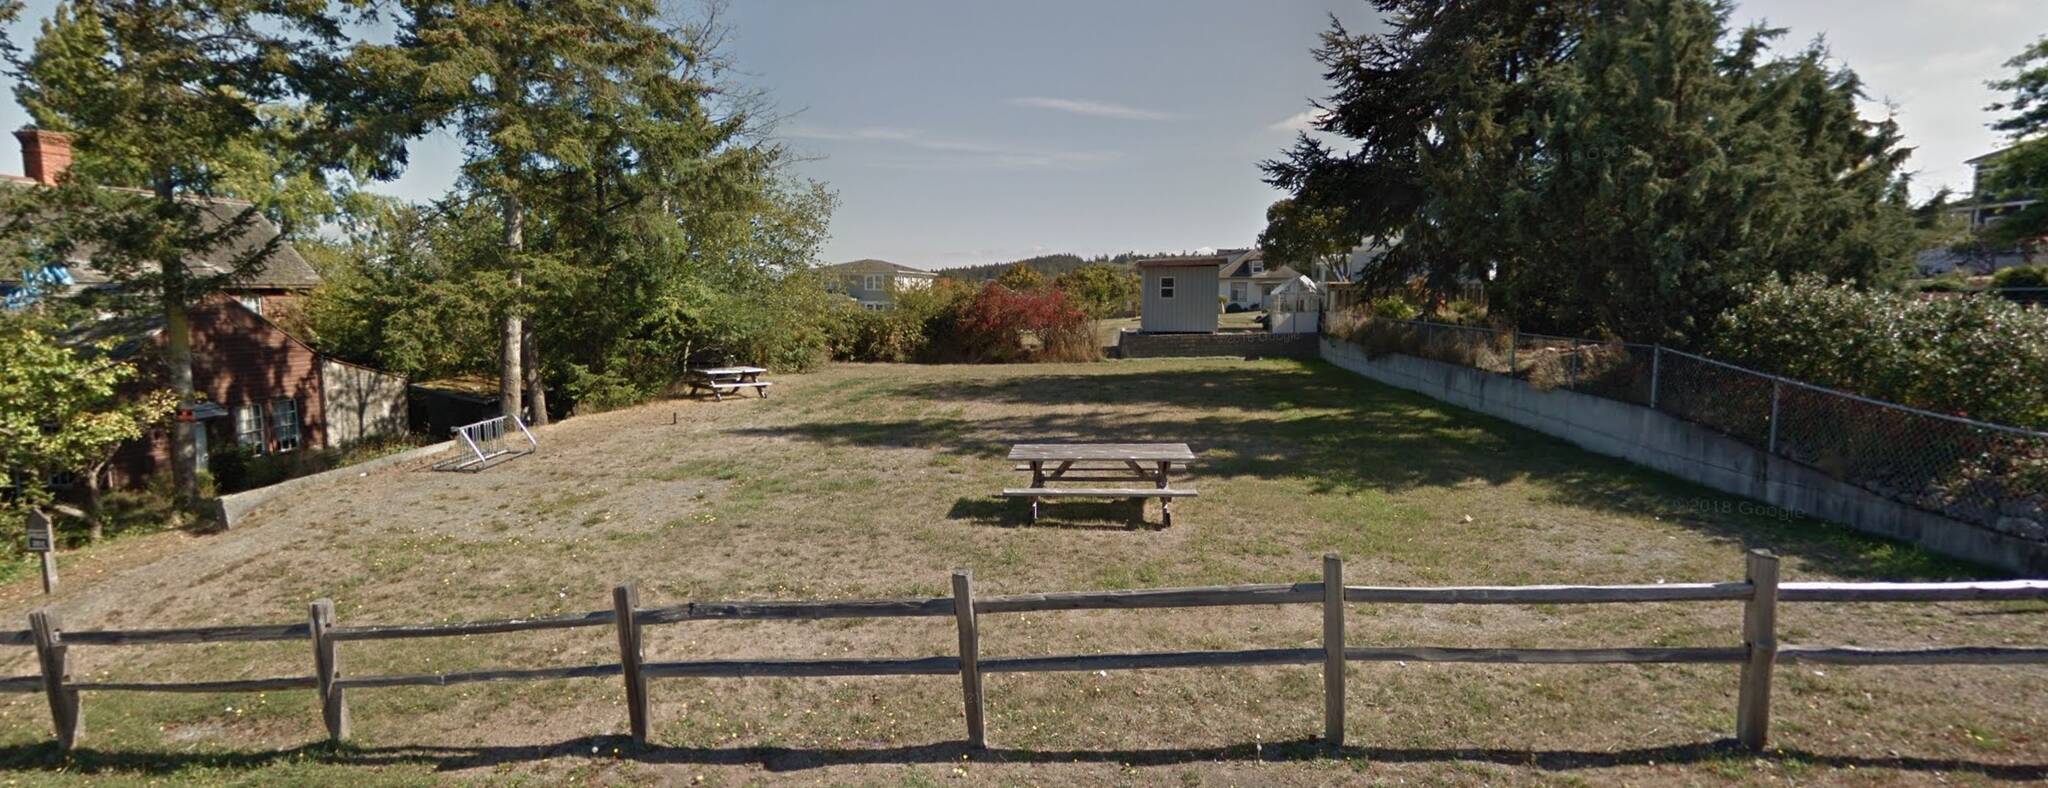 The Johnson lot is located between Haller House and Cook’s Corner Park. (Google Maps Image)